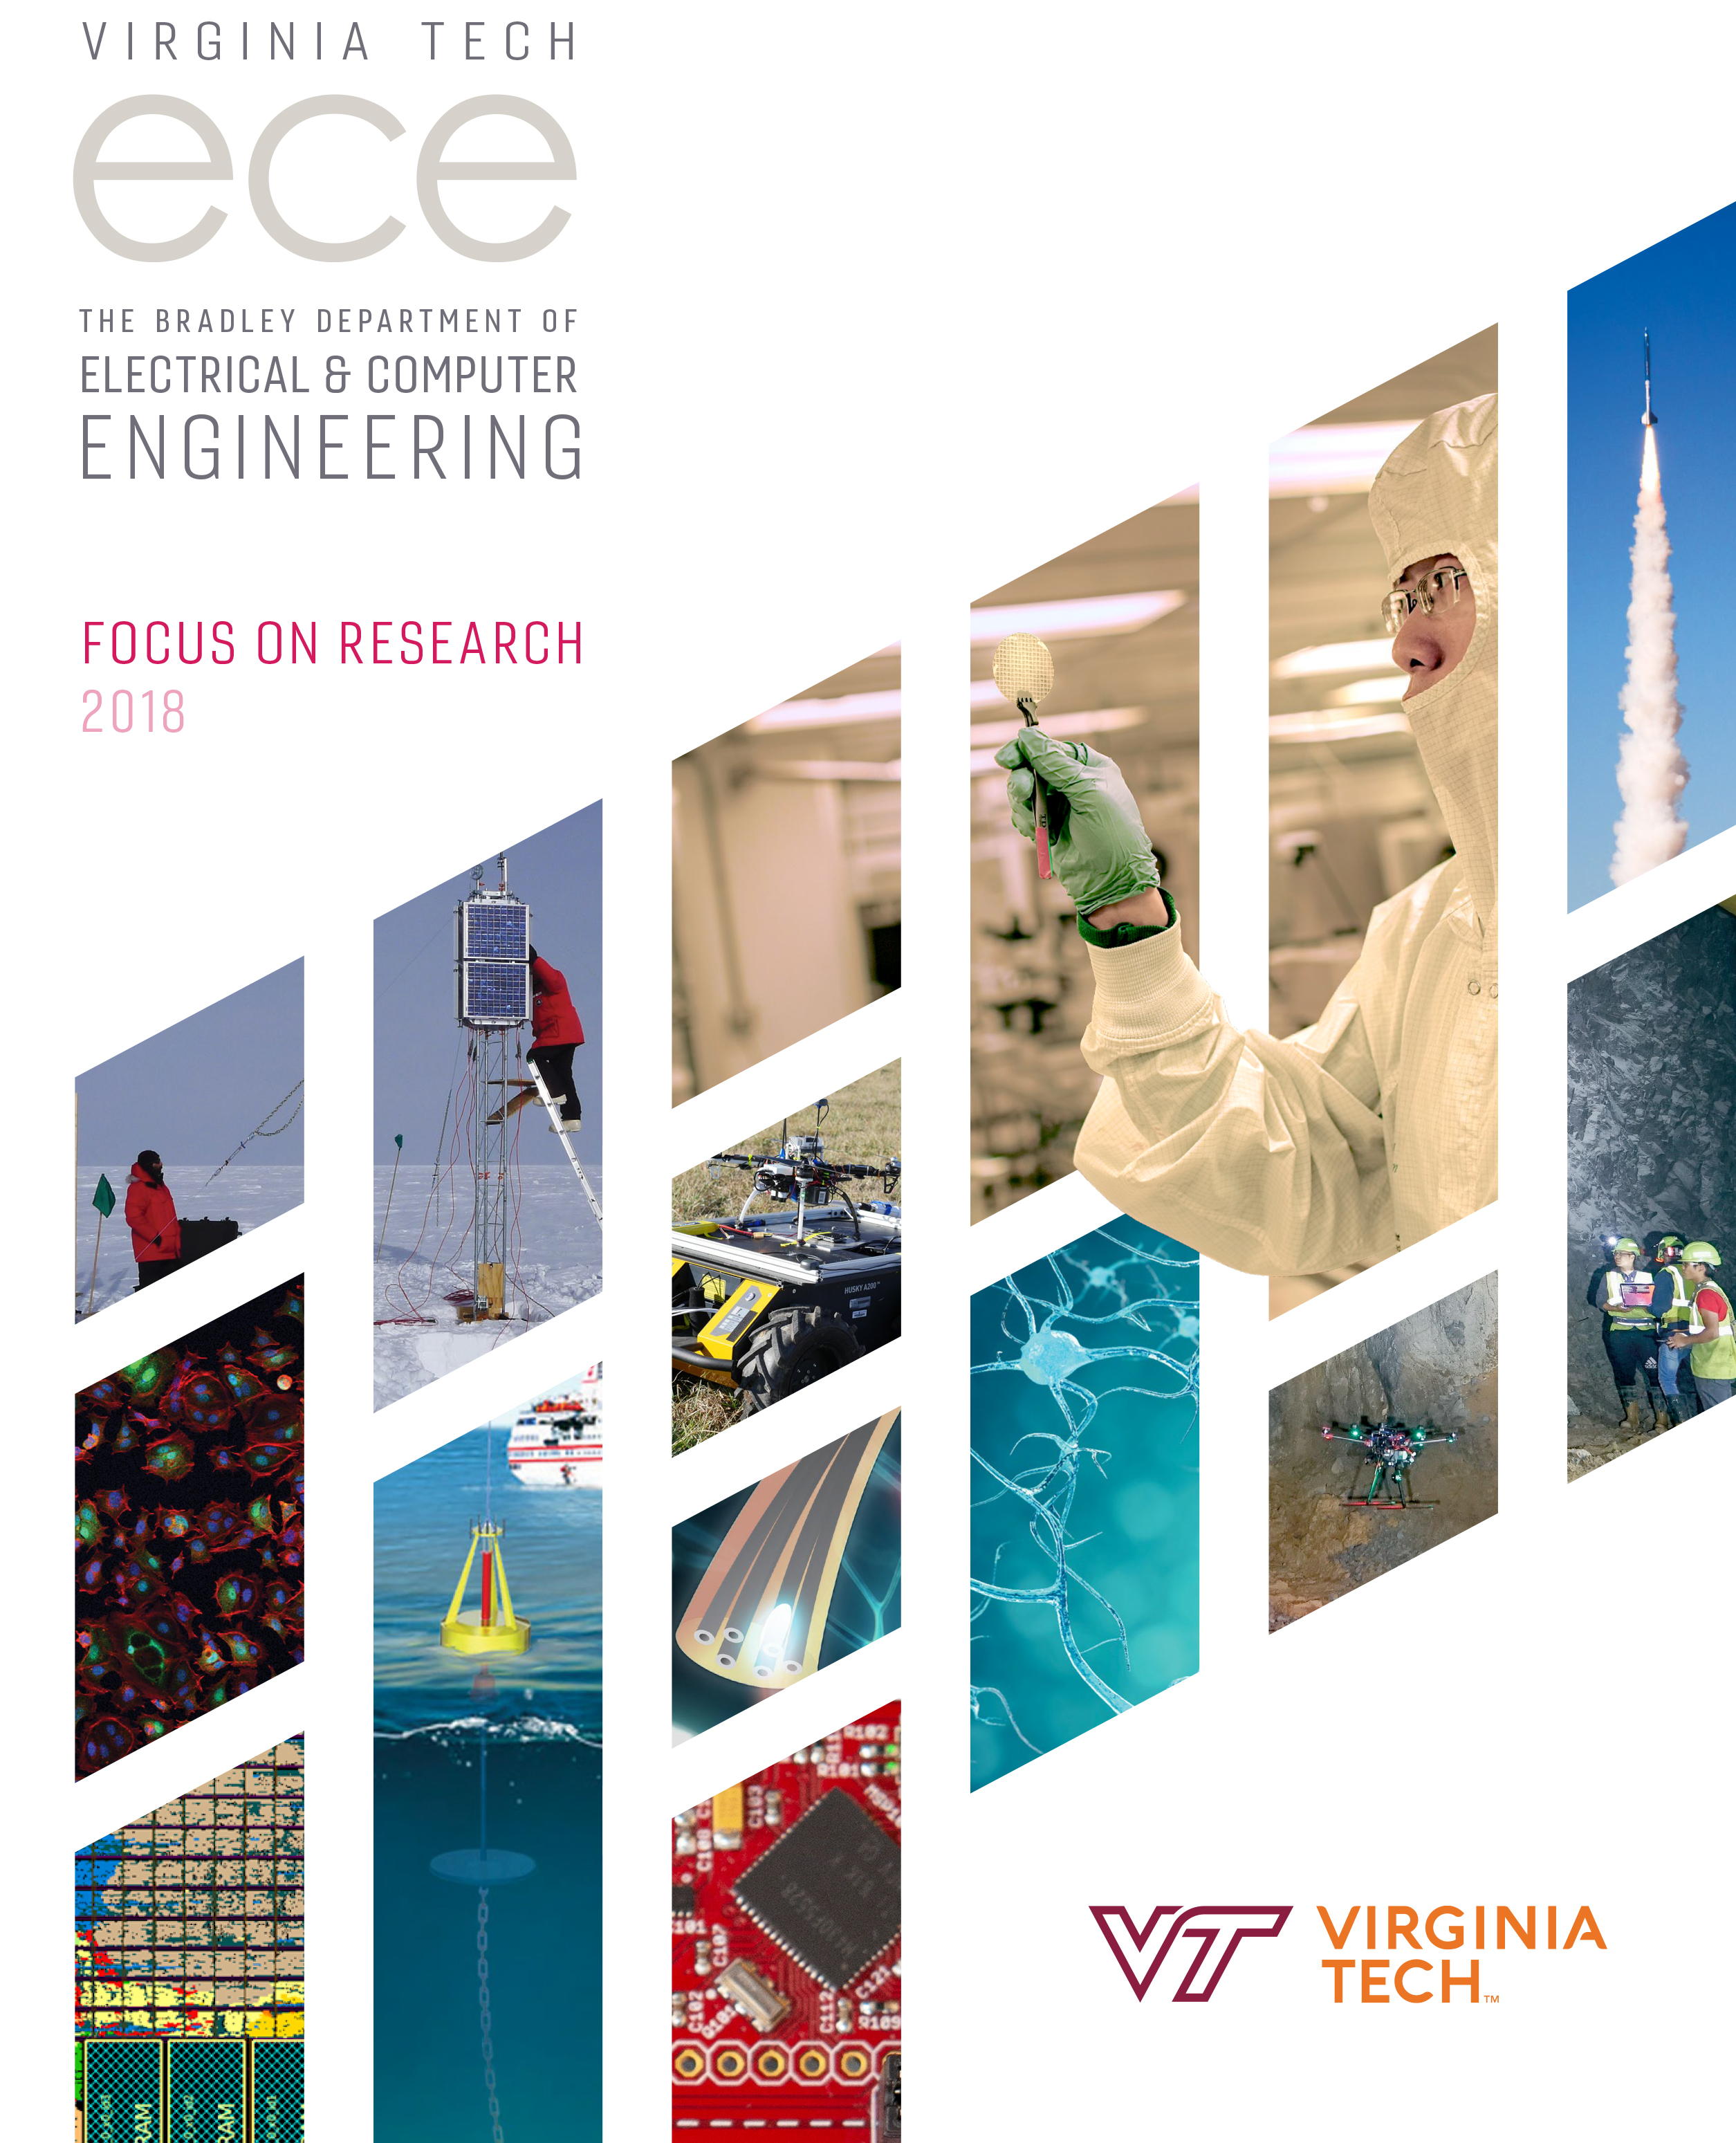 Focus on Research 2018